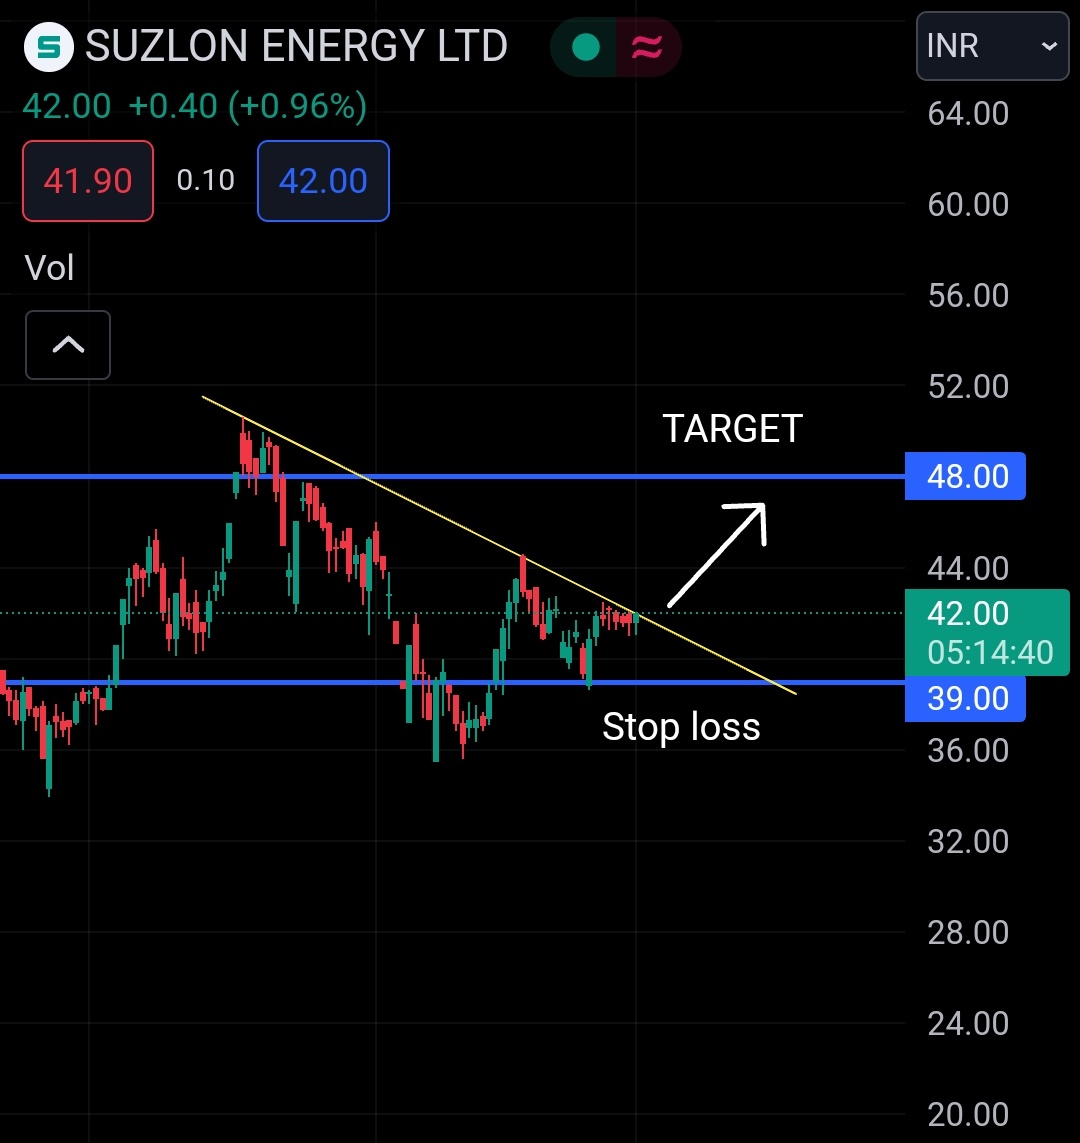 SUZLON ENERGY LTD

👉🏻 At very good levels, chart looking amazing
👉🏻 1st target can be 48, but it's a long term stock 
👉🏻 Election in mind, keep it in radar too

👉🏻 NOT A RECOMMENDATION

#SUZLON #sharemarket #StocksToBuy #stocktowatch #breakoutstocks #stocks